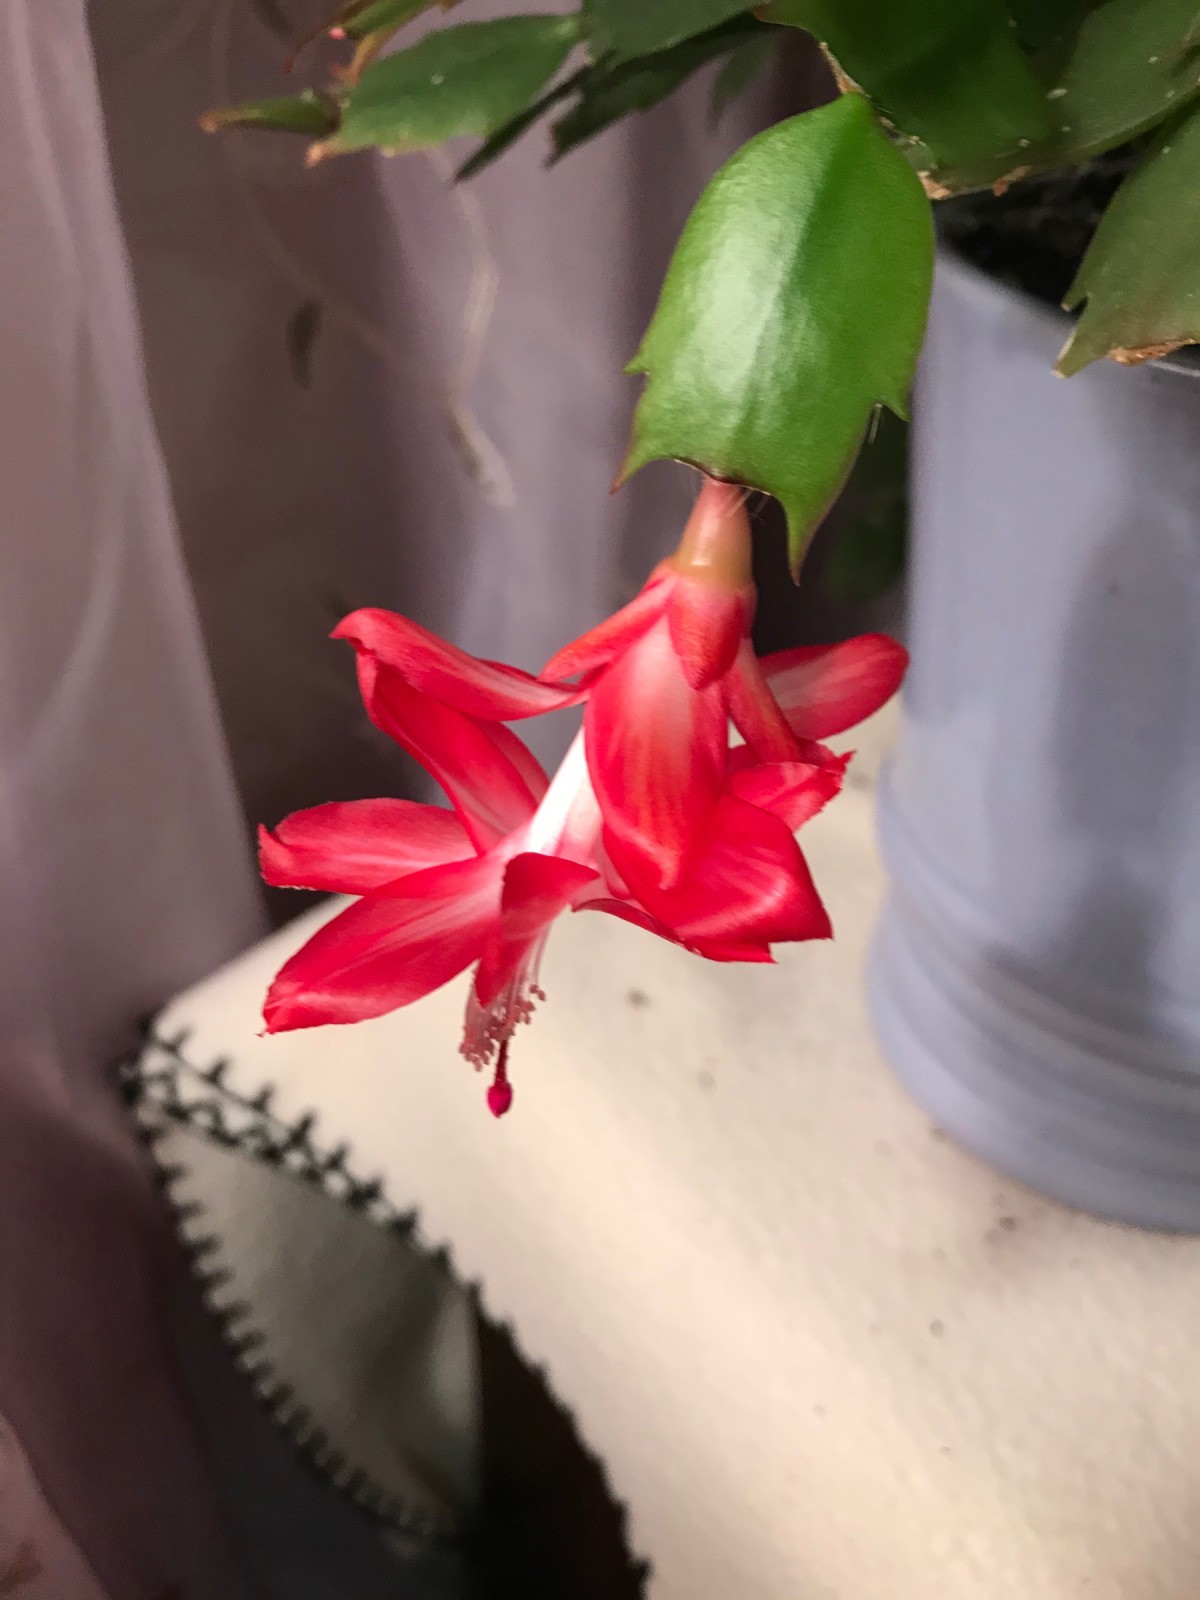 Caring For A Dying Christmas Cactus / How do i know if my christmas ...